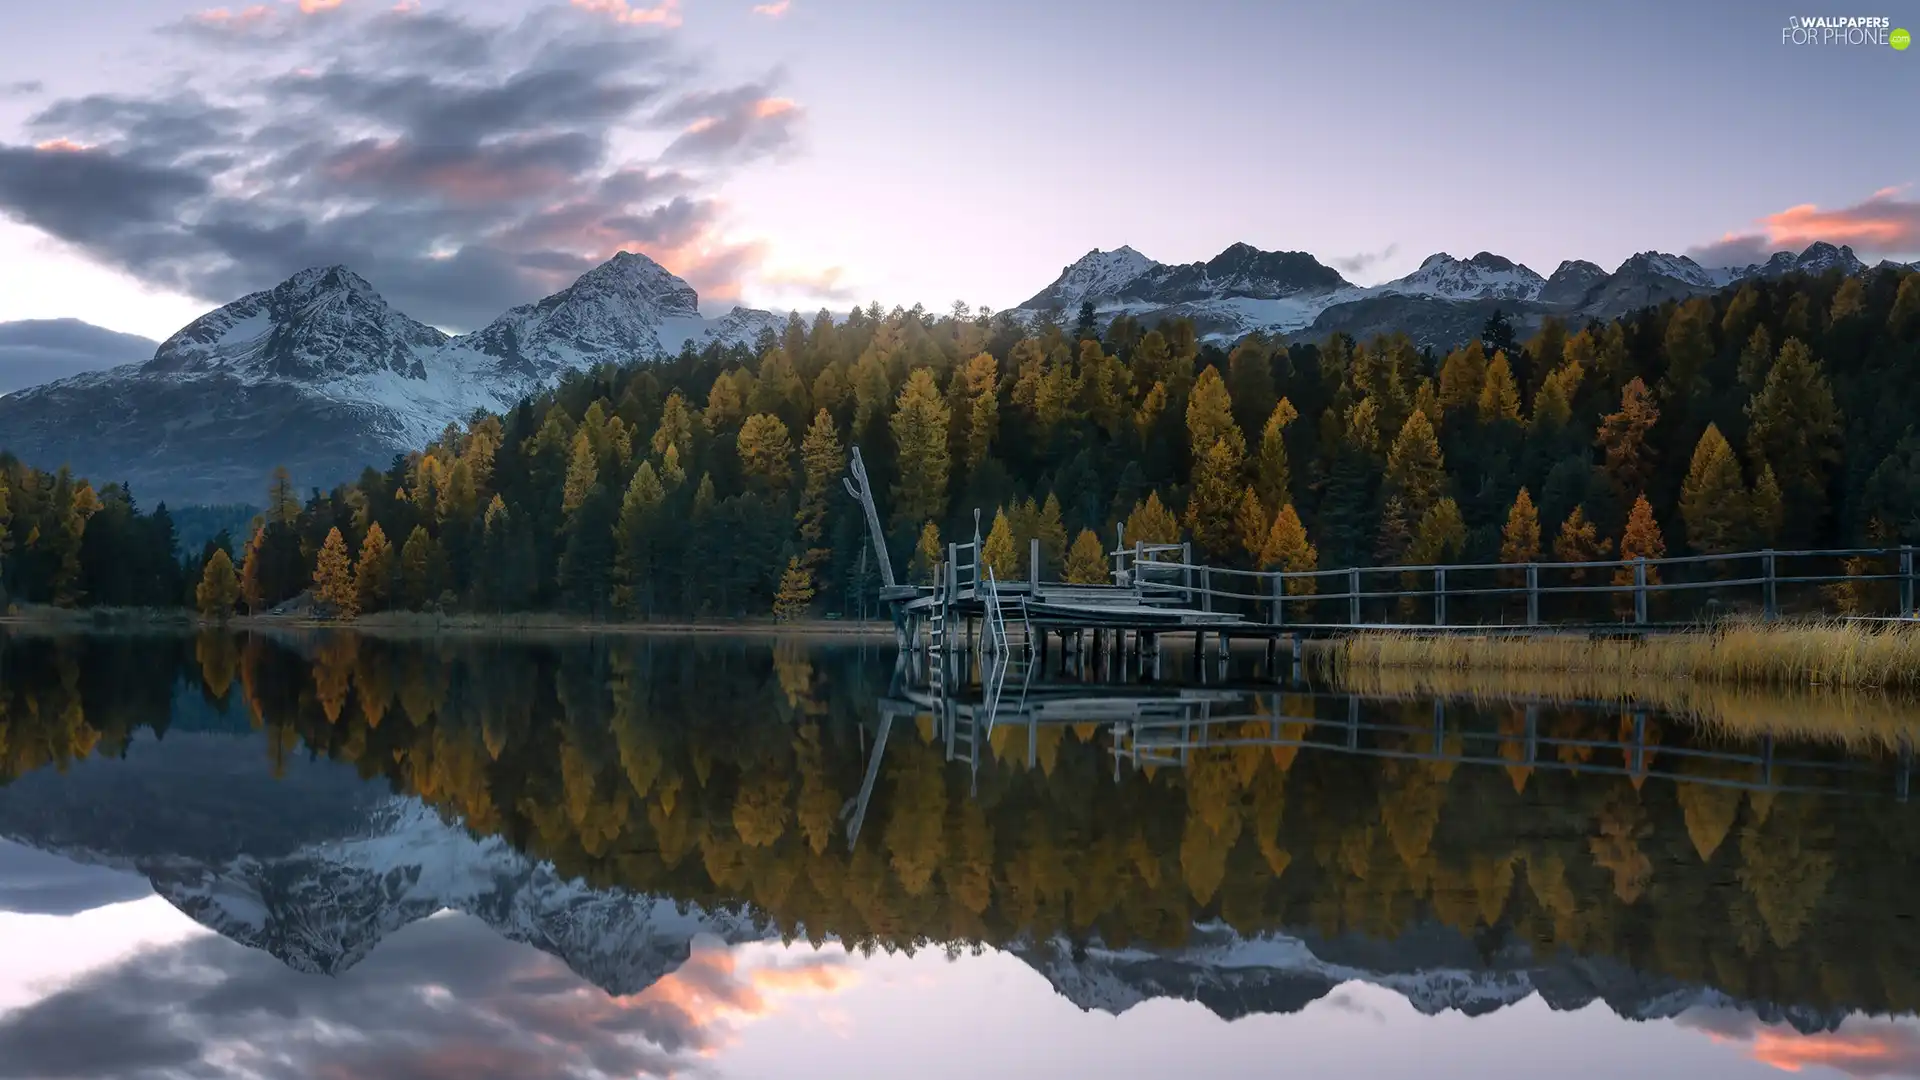 trees, lake, clouds, Platform, Mountains, viewes, reflection